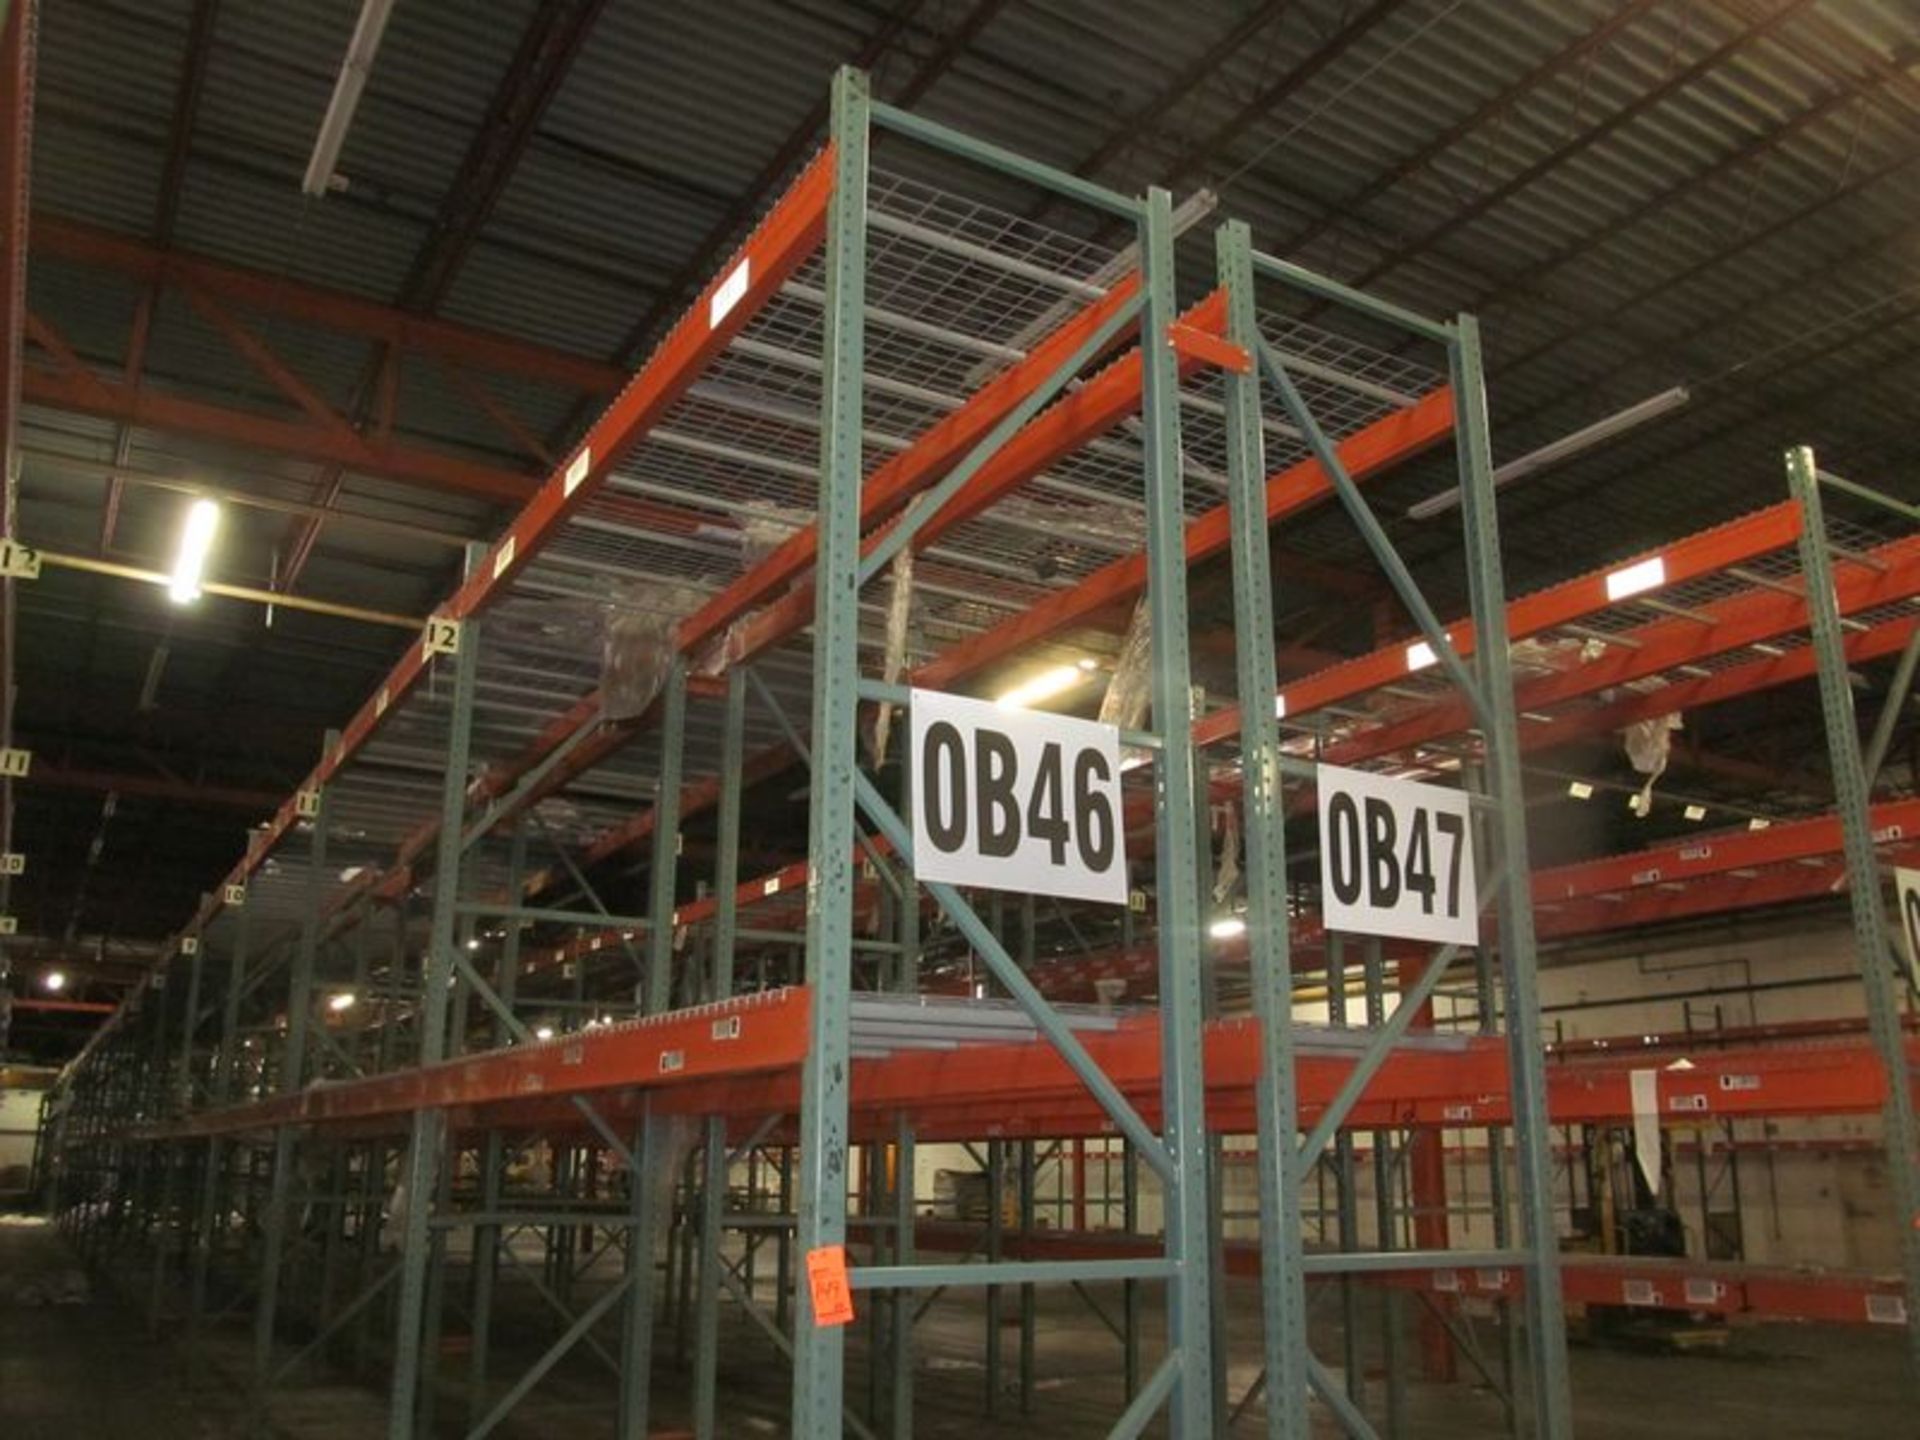 Lot of (24) sections Interack cup style pallet rack, (26) 14' high with 3" x 3" uprights, (96) 12'